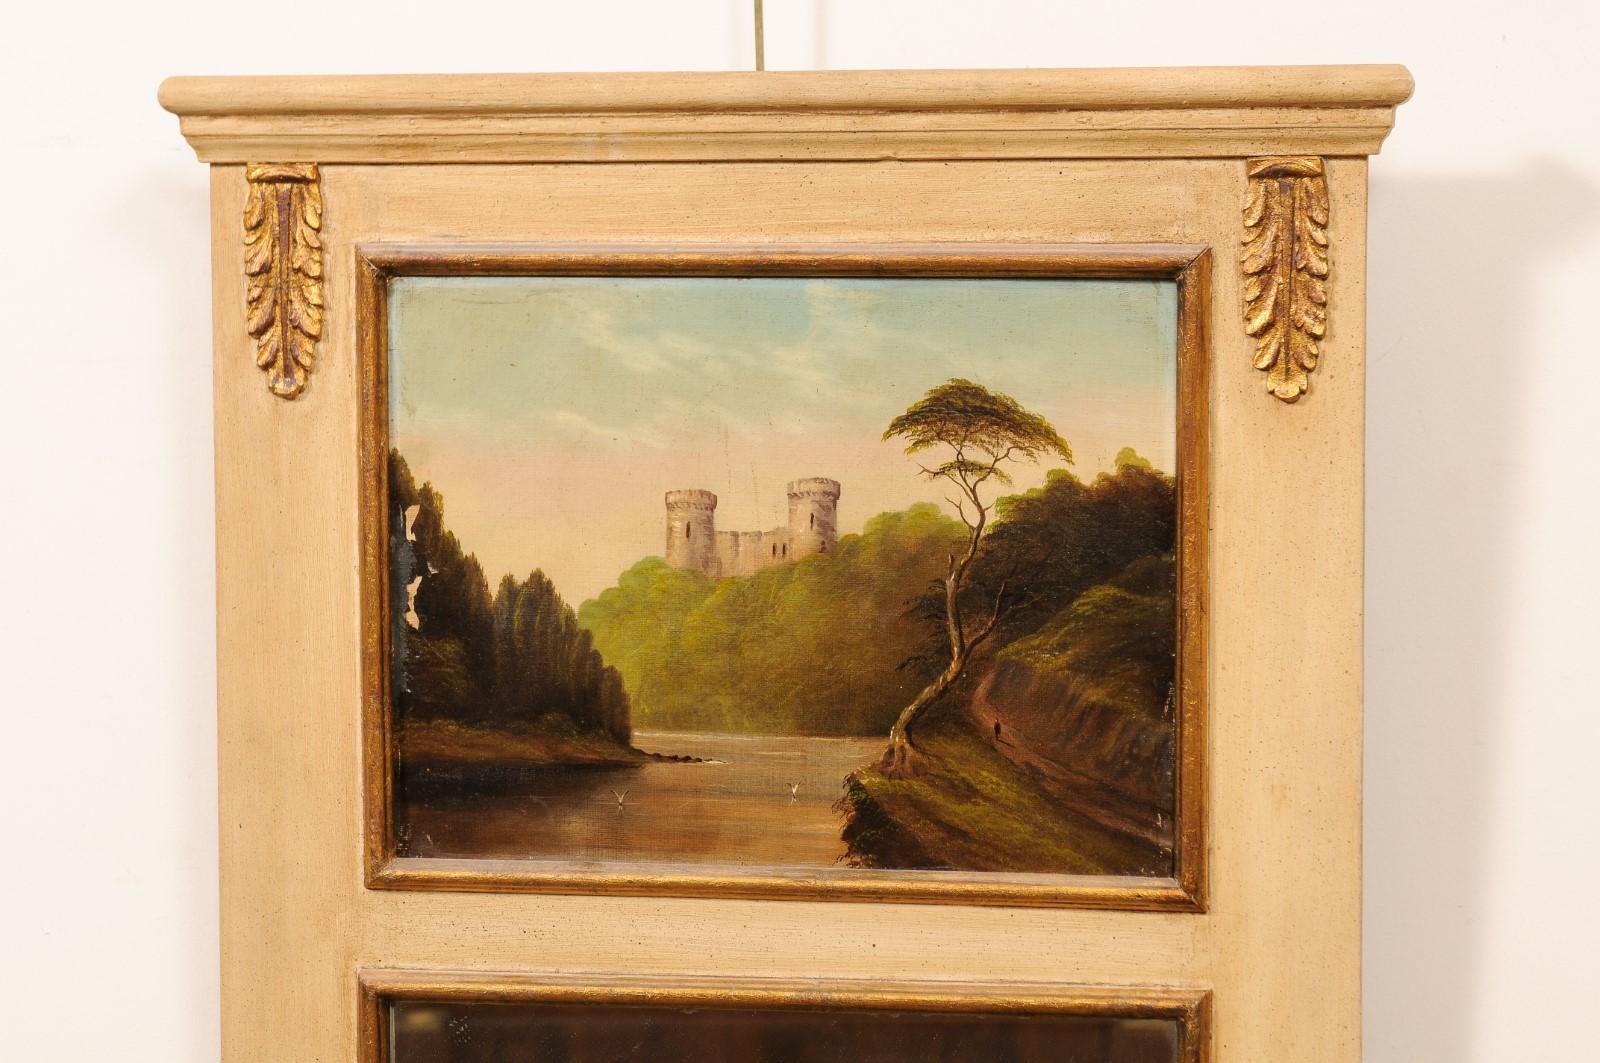 Small Trumeau Mirror with 19th Century Landscape Painting, France For Sale 4